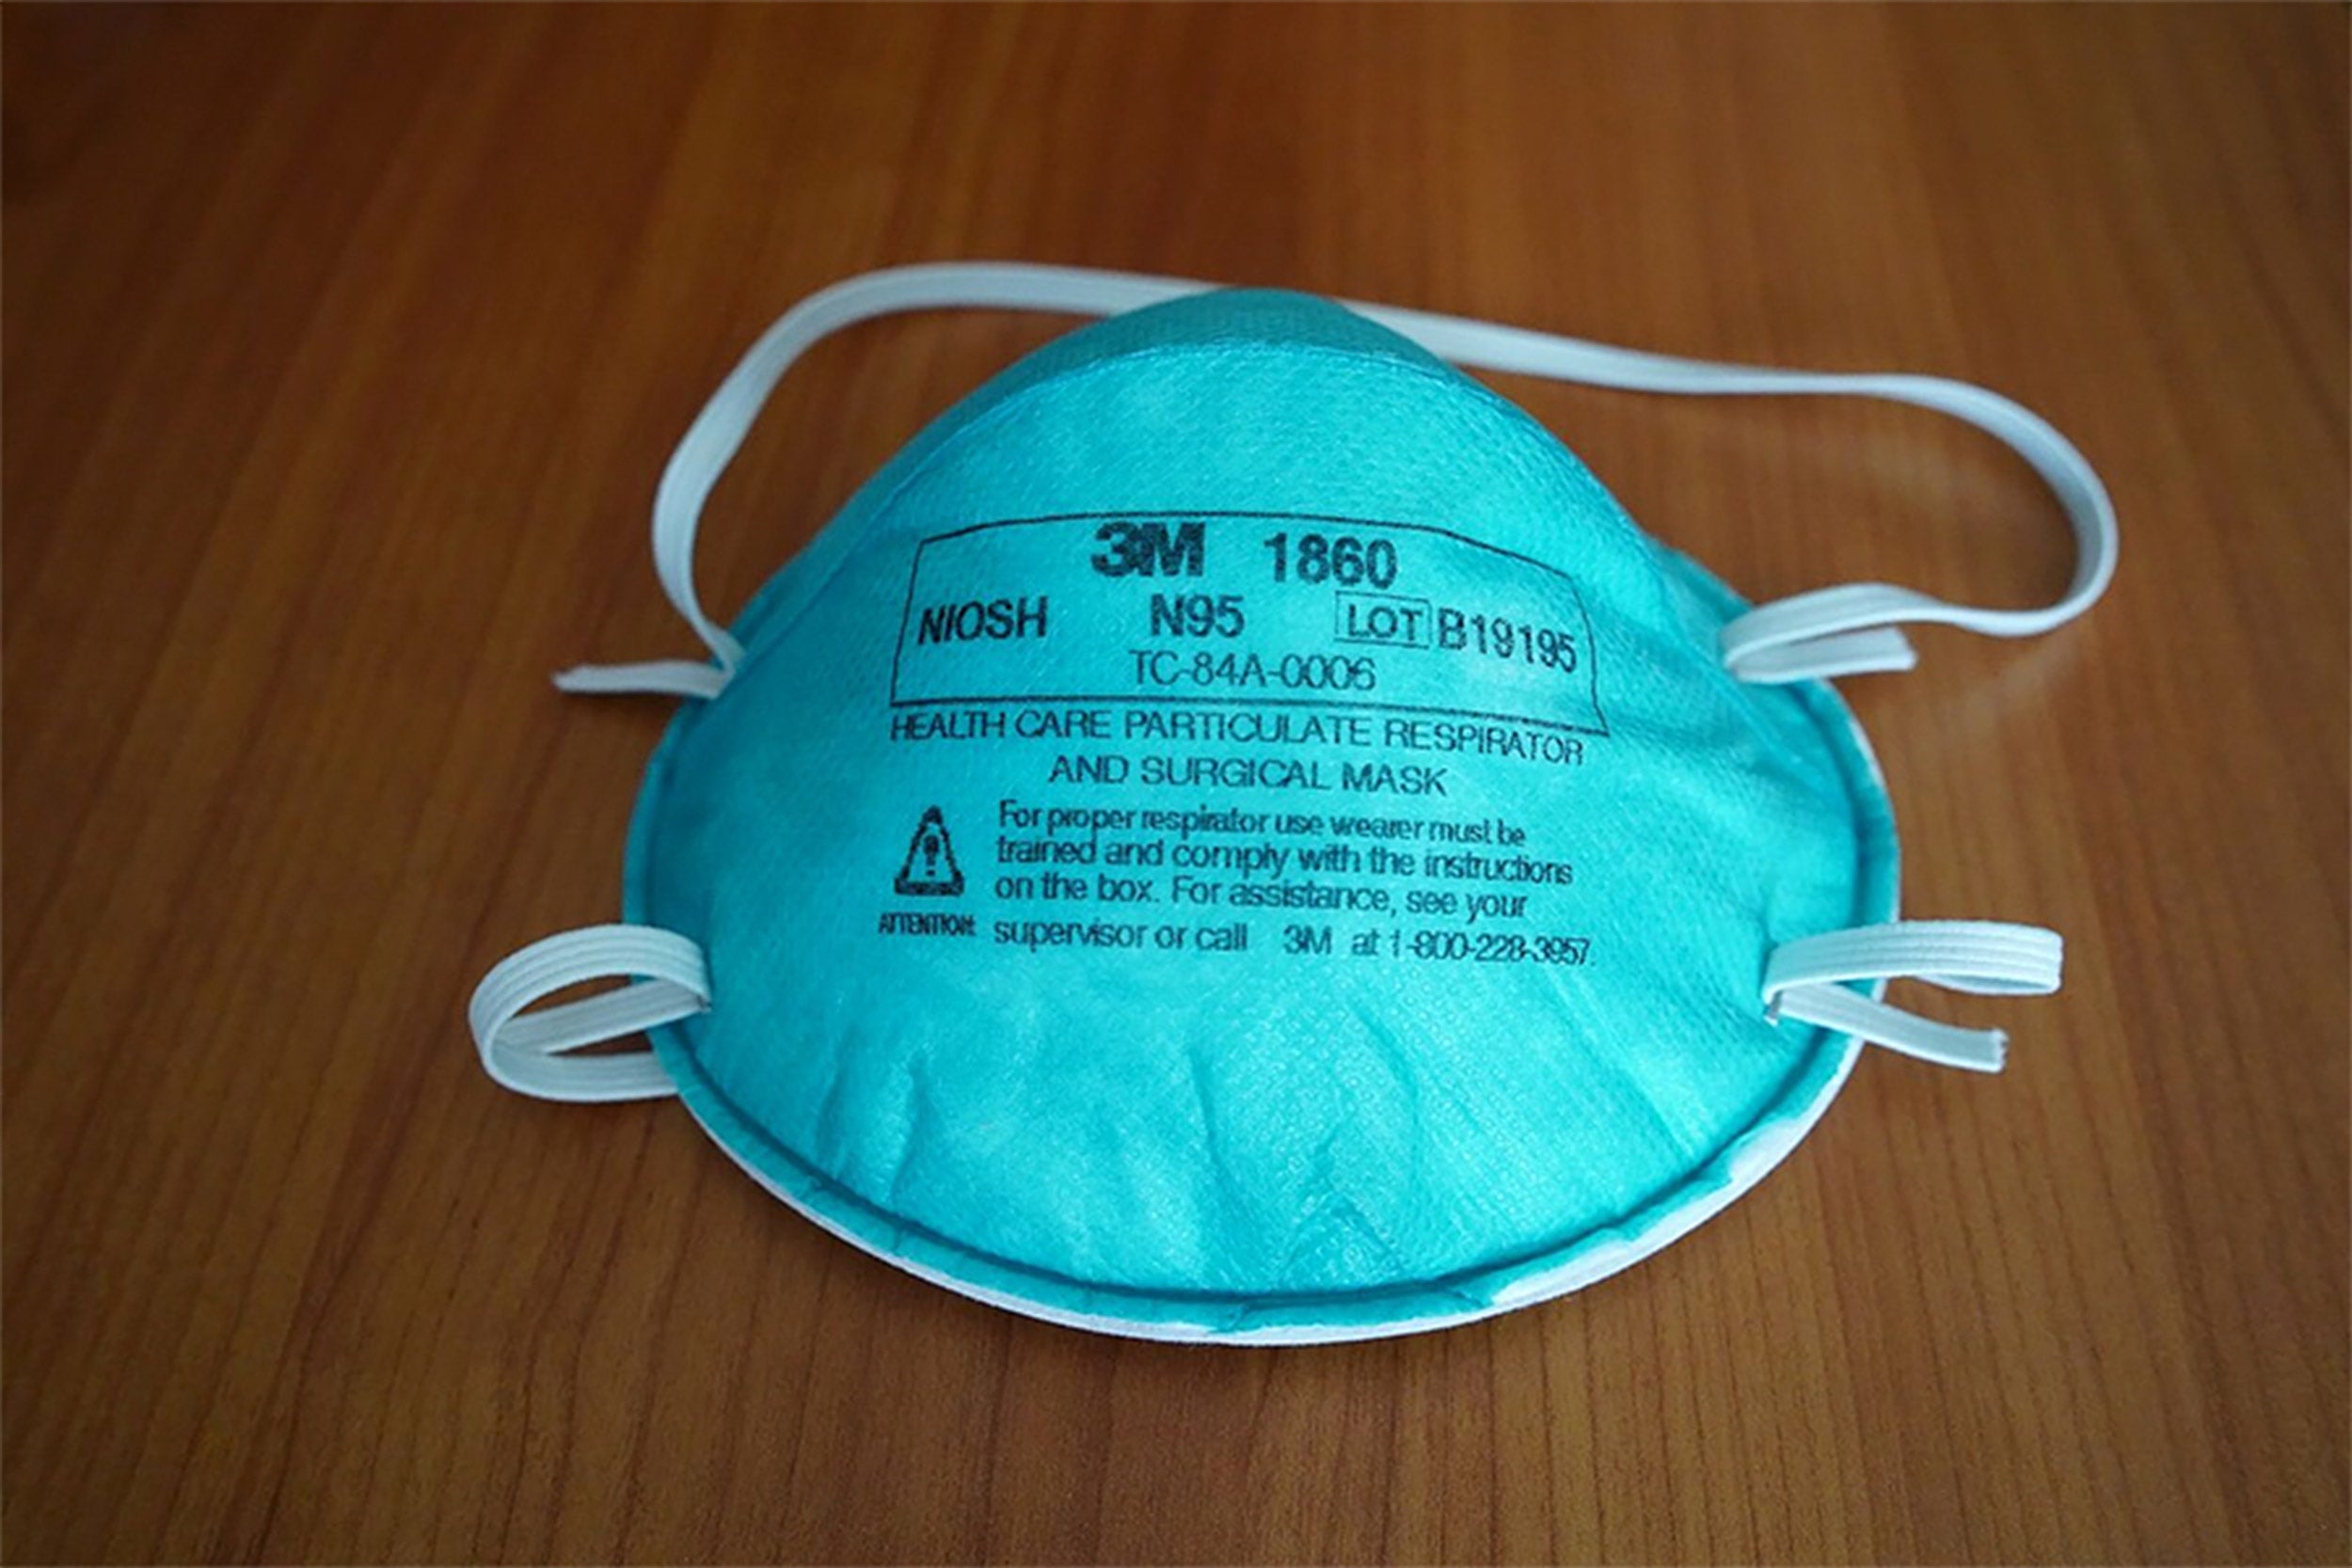 How to Care for Your N95 Mask